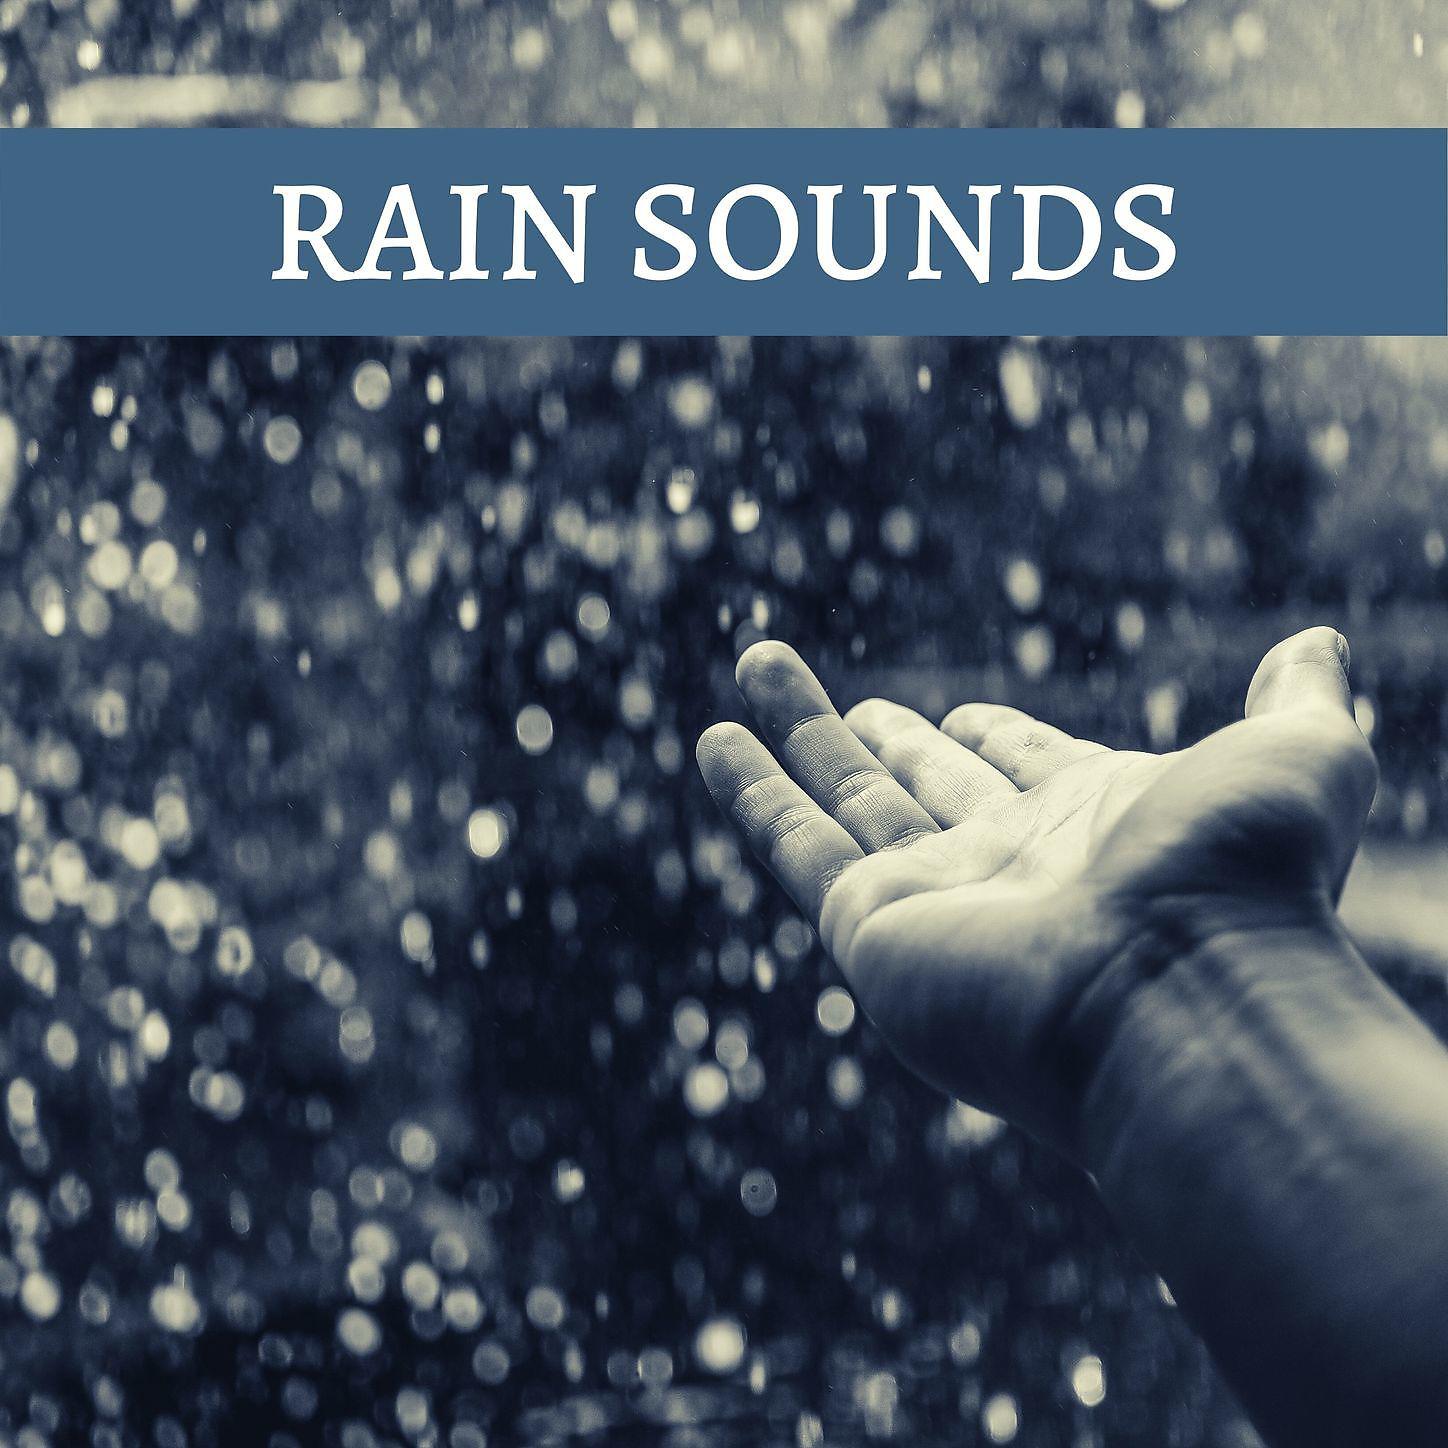 He comes the rain. Something in the way” with Rain Sounds. Rainy Day • Relaxing Piano Music with Soft Rain Sounds | Sleep, study, Relax.